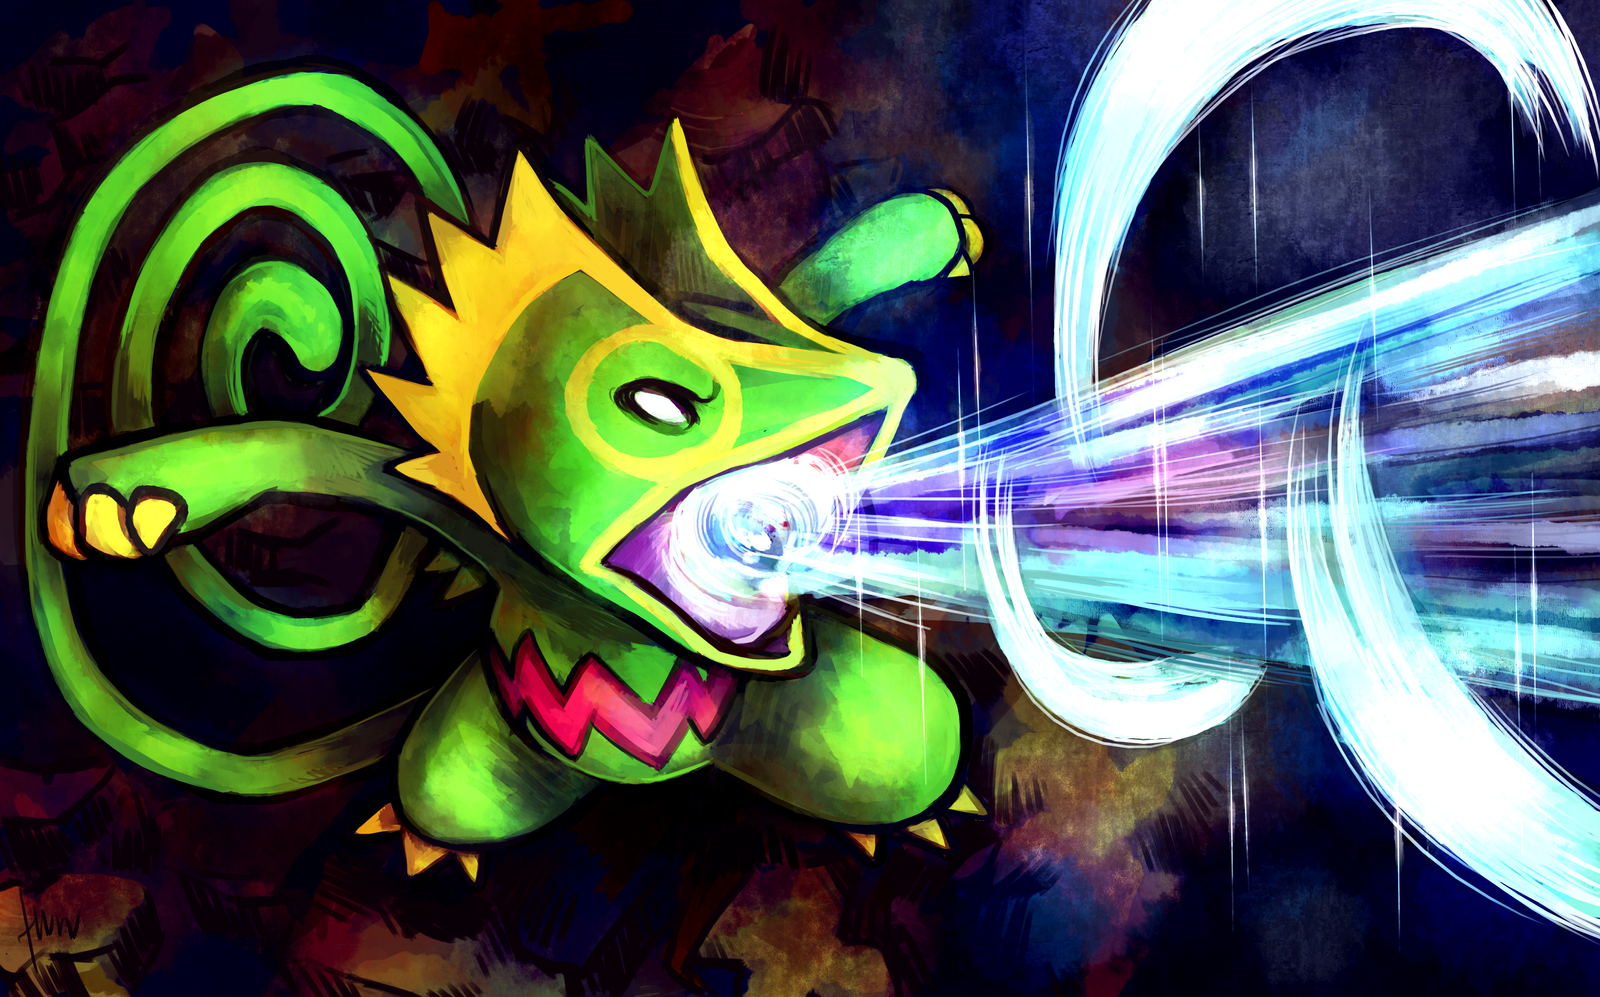 kecleon_used_ice_beam_by_haychel-d58wh3s.png